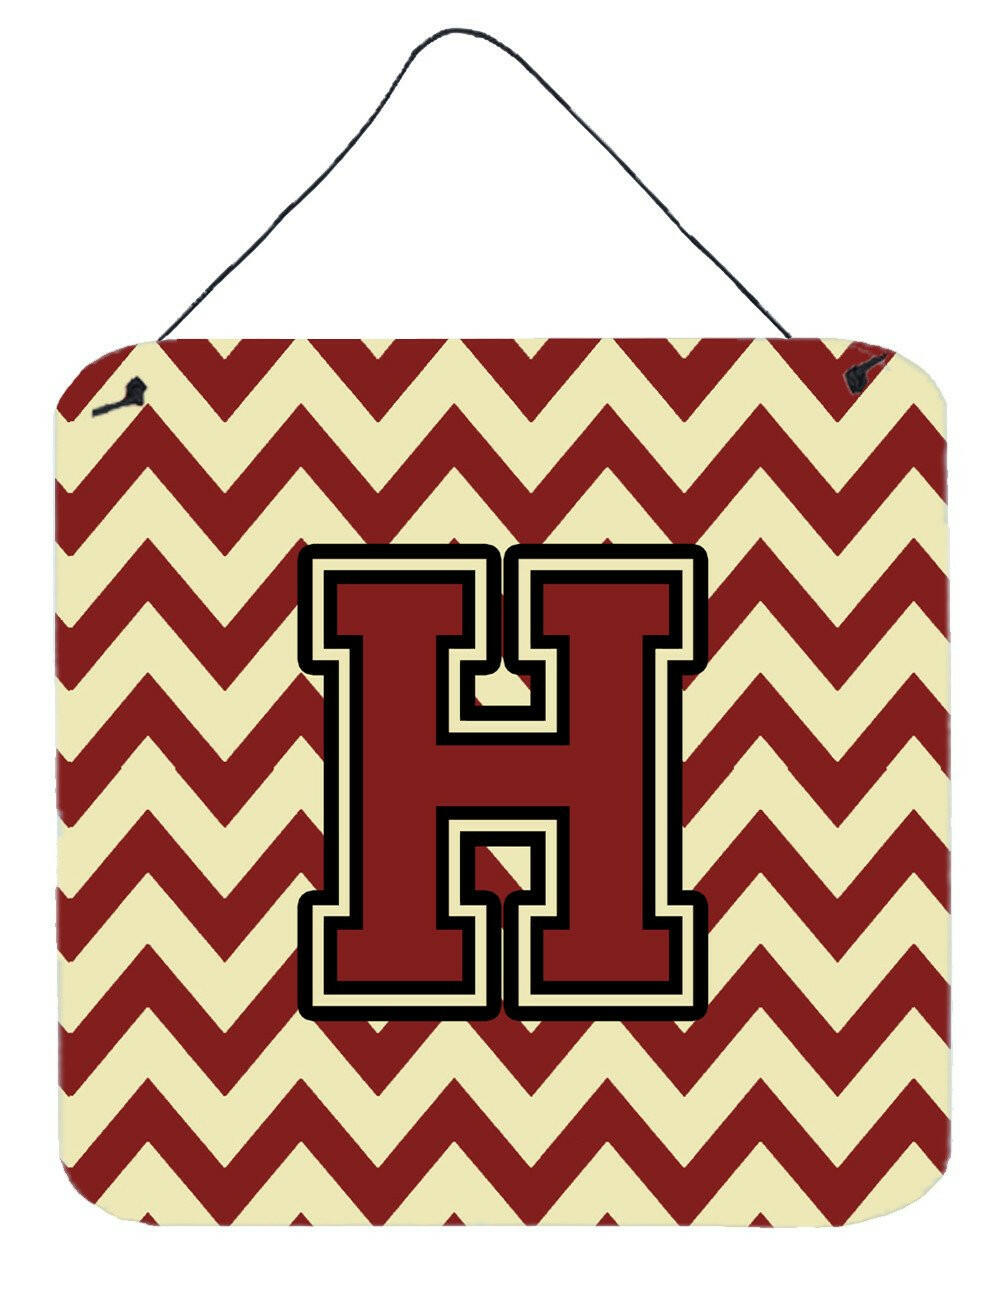 Letter H Chevron Maroon and Gold Wall or Door Hanging Prints CJ1061-HDS66 by Caroline's Treasures